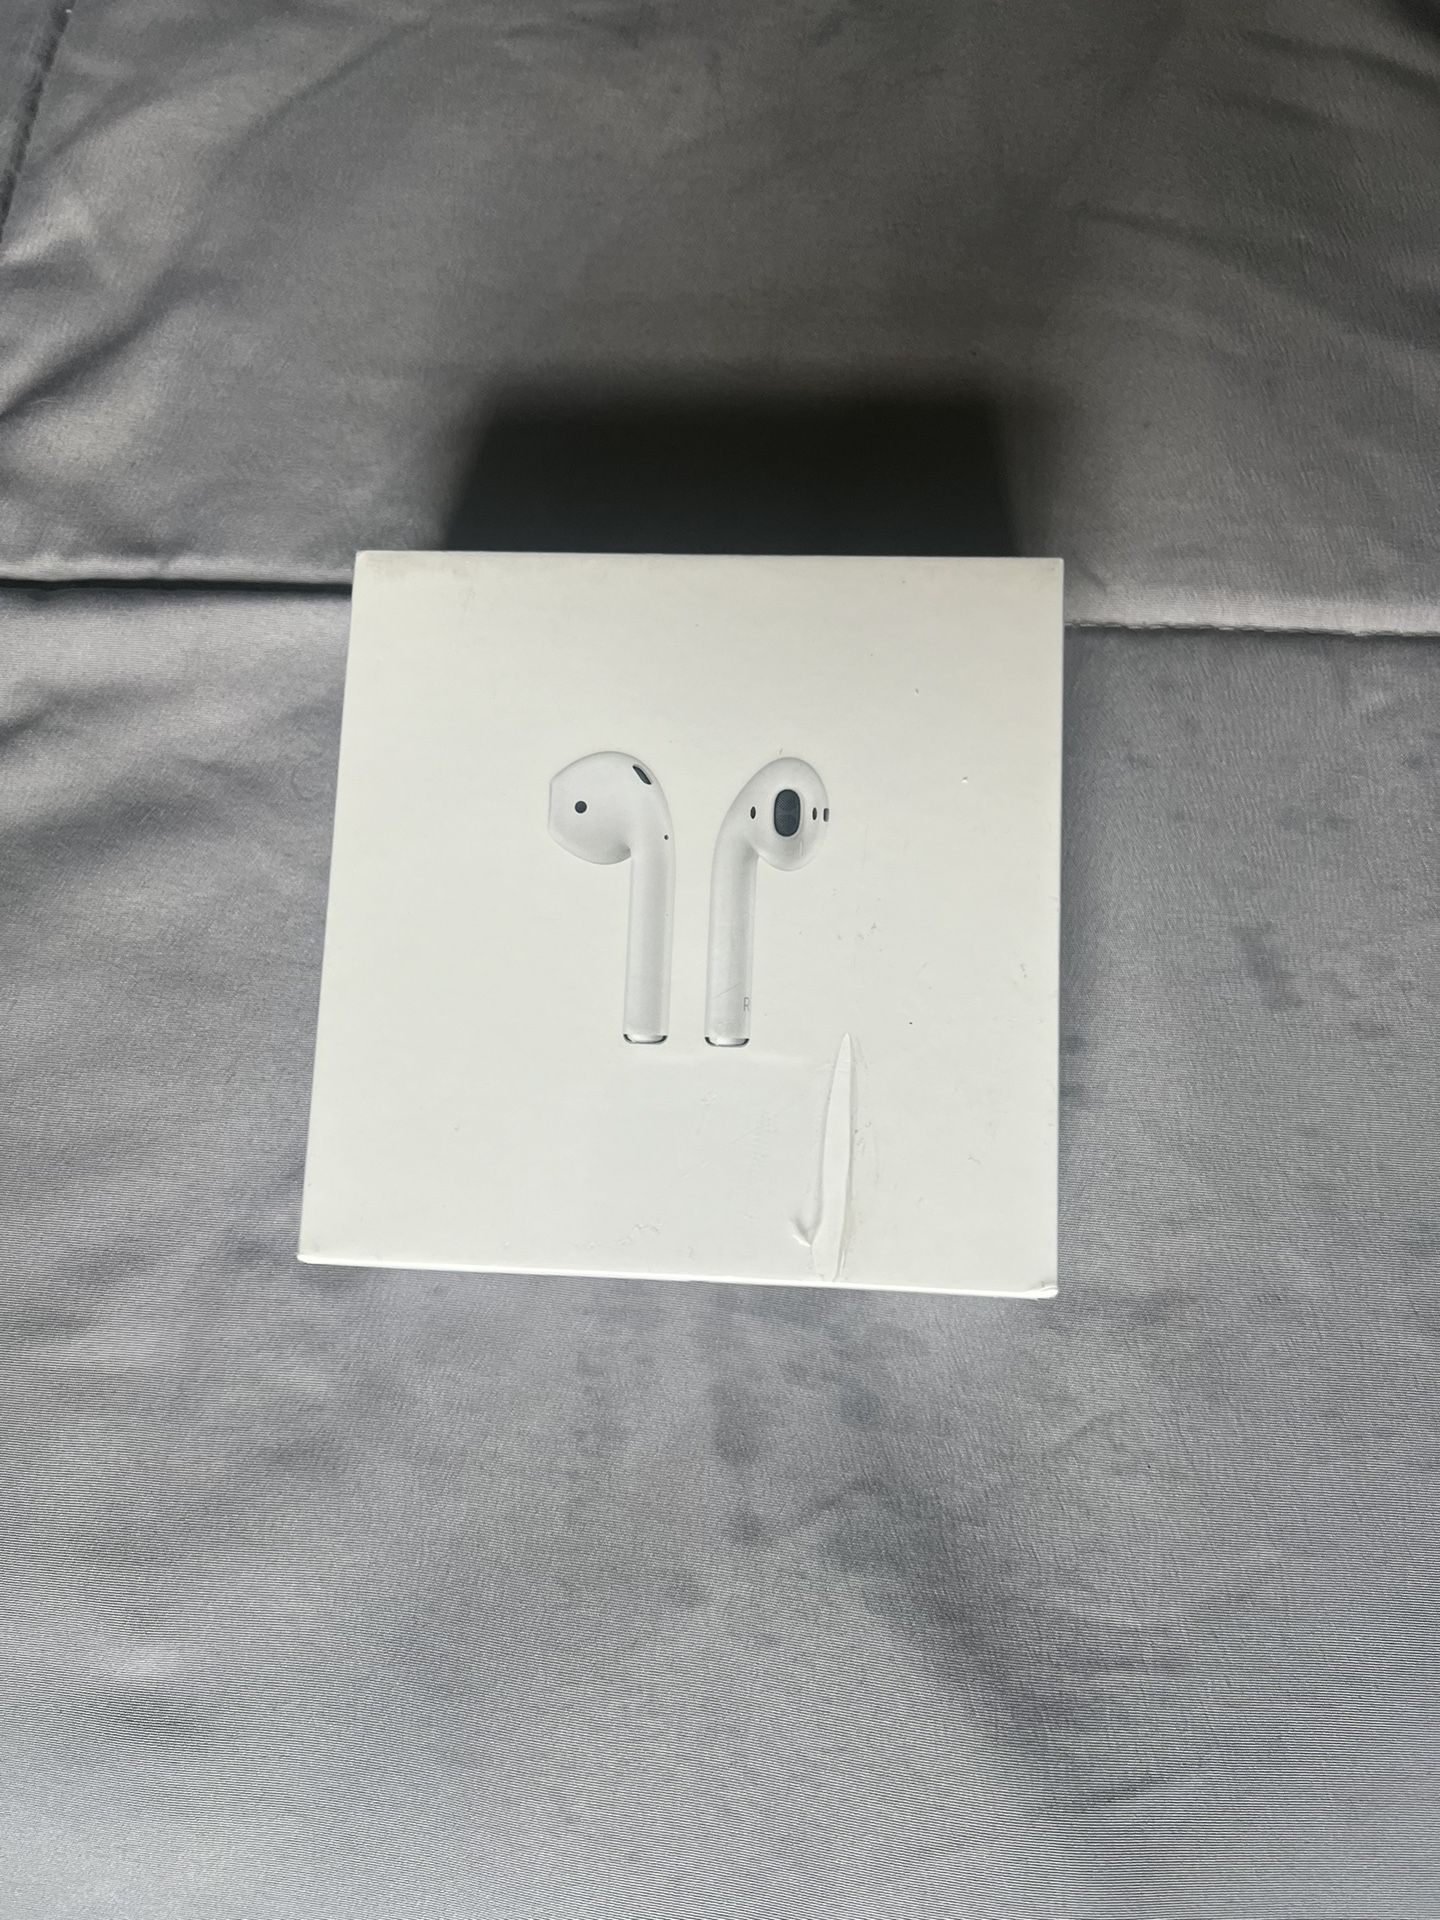 AirPods (New/Unsealed)